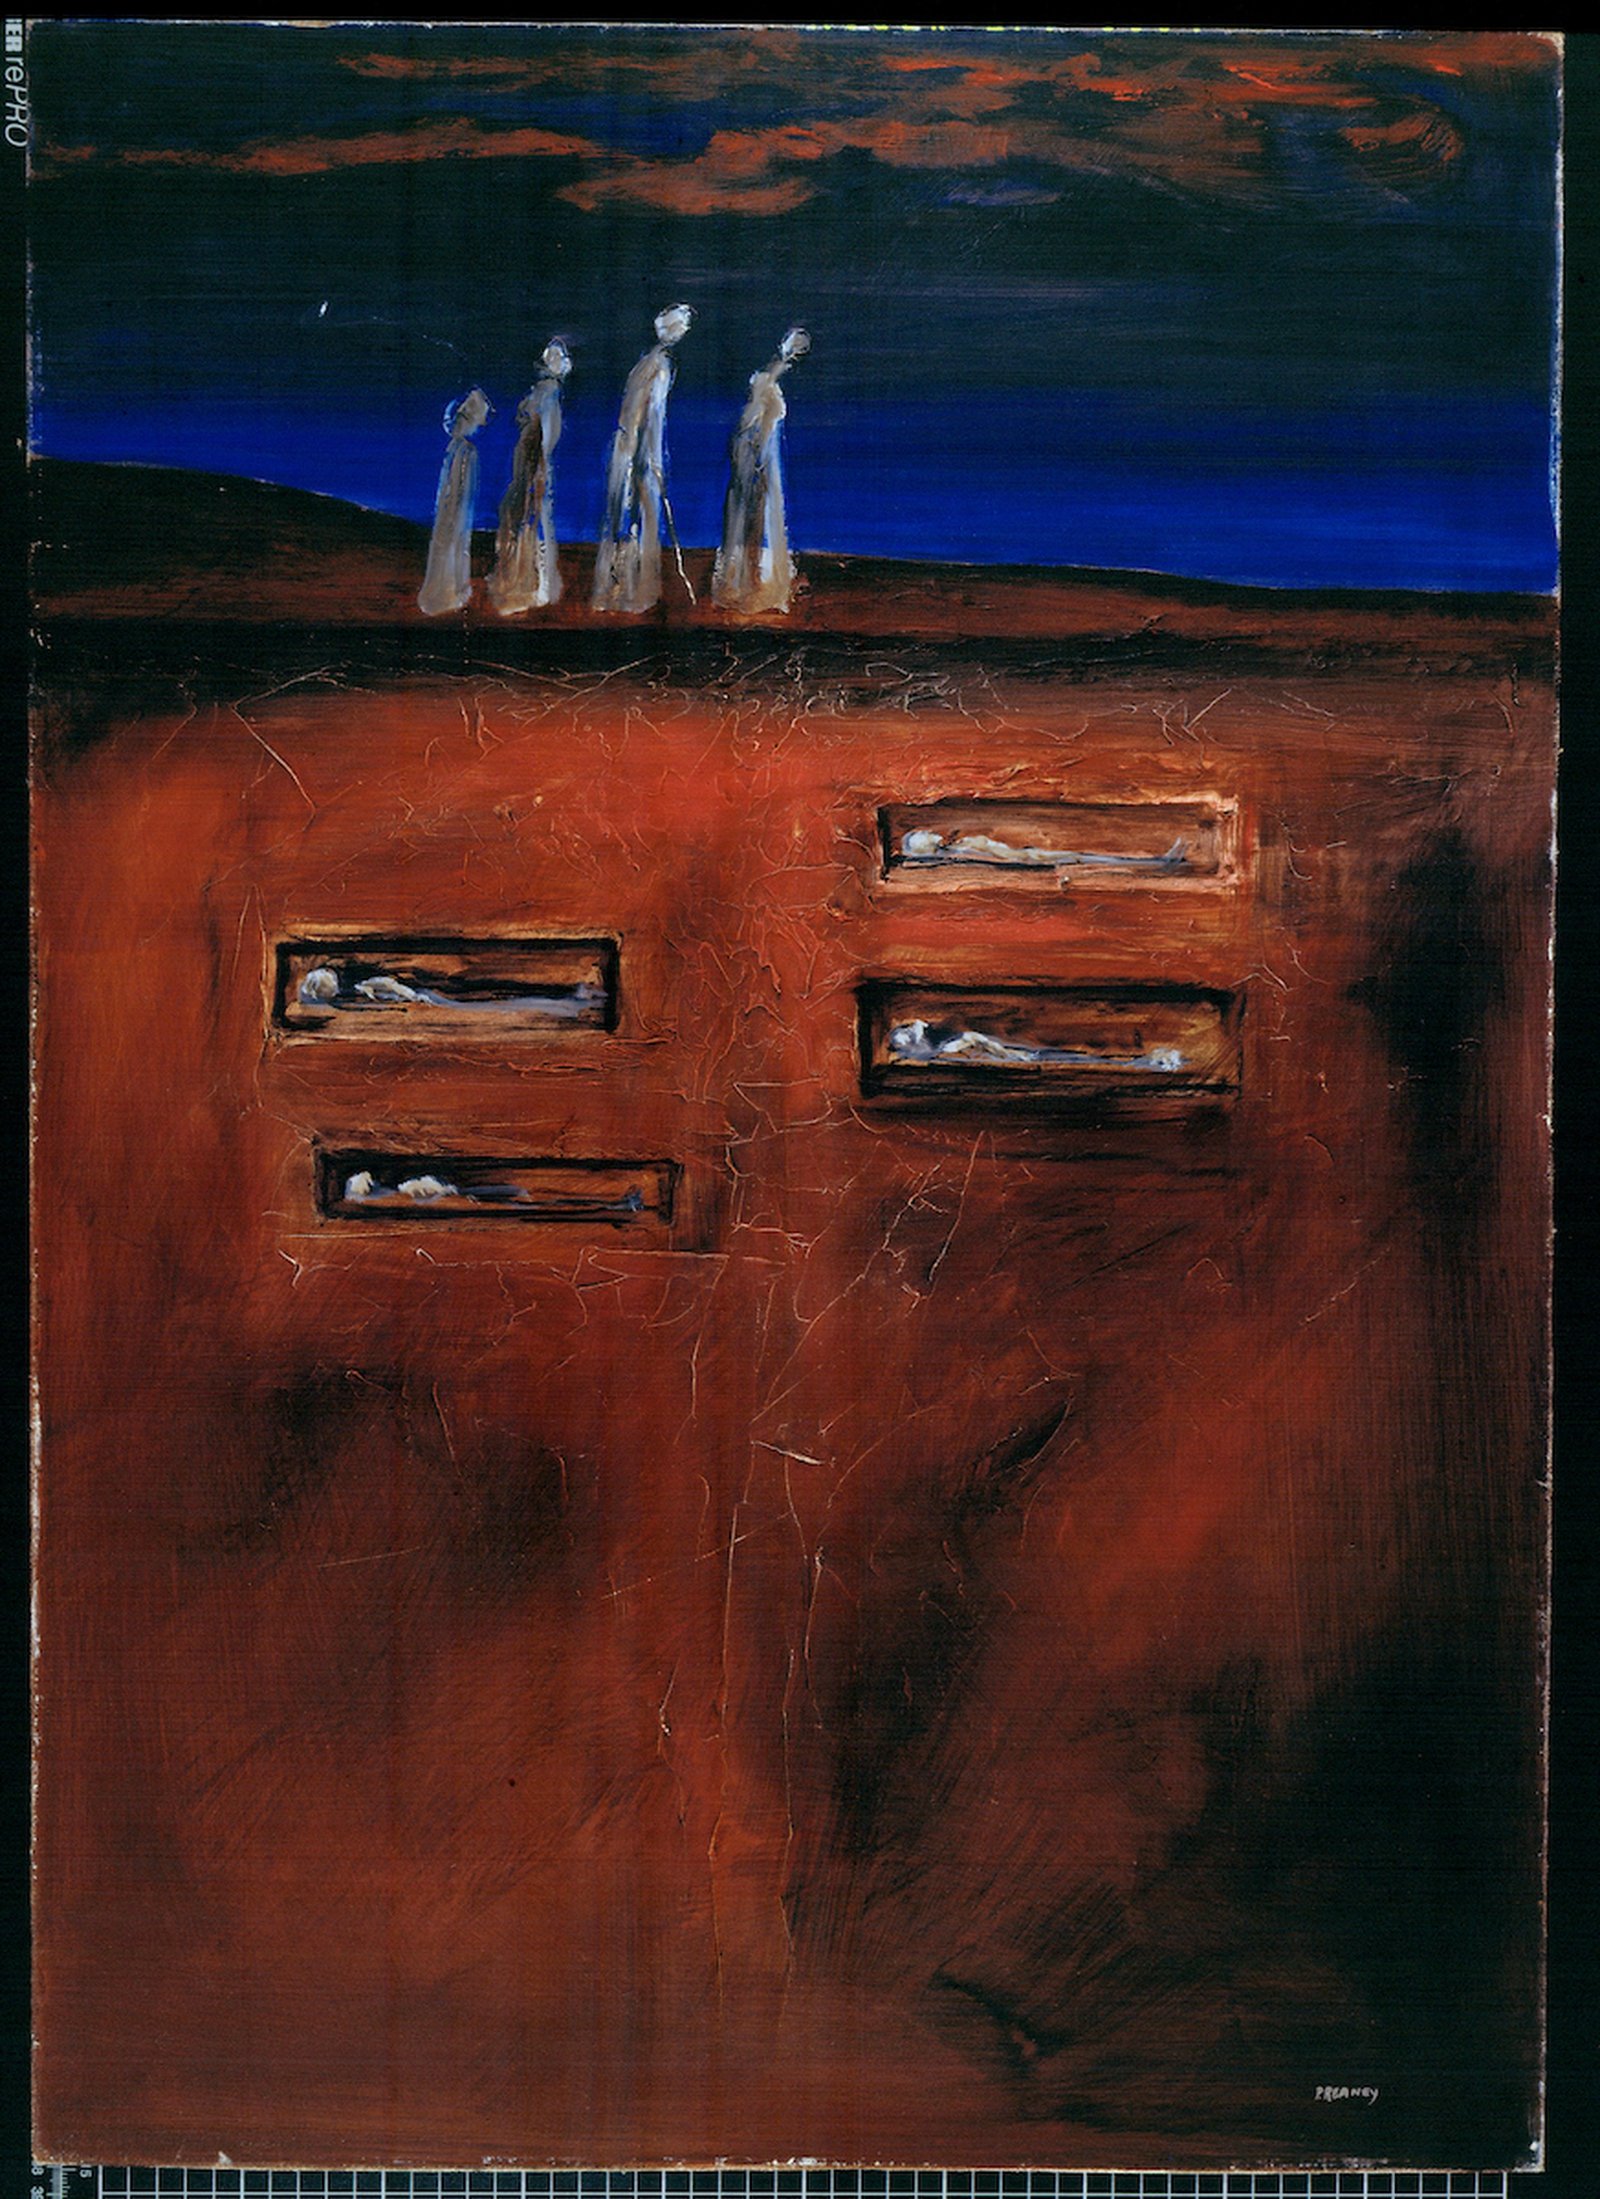 Image - Departure by Pádraic Reaney
b. 1952 (1995). Image copyright Pádraic Reaney. Image courtesy of Ireland's Great Hunger Museum at Quinnipiac University